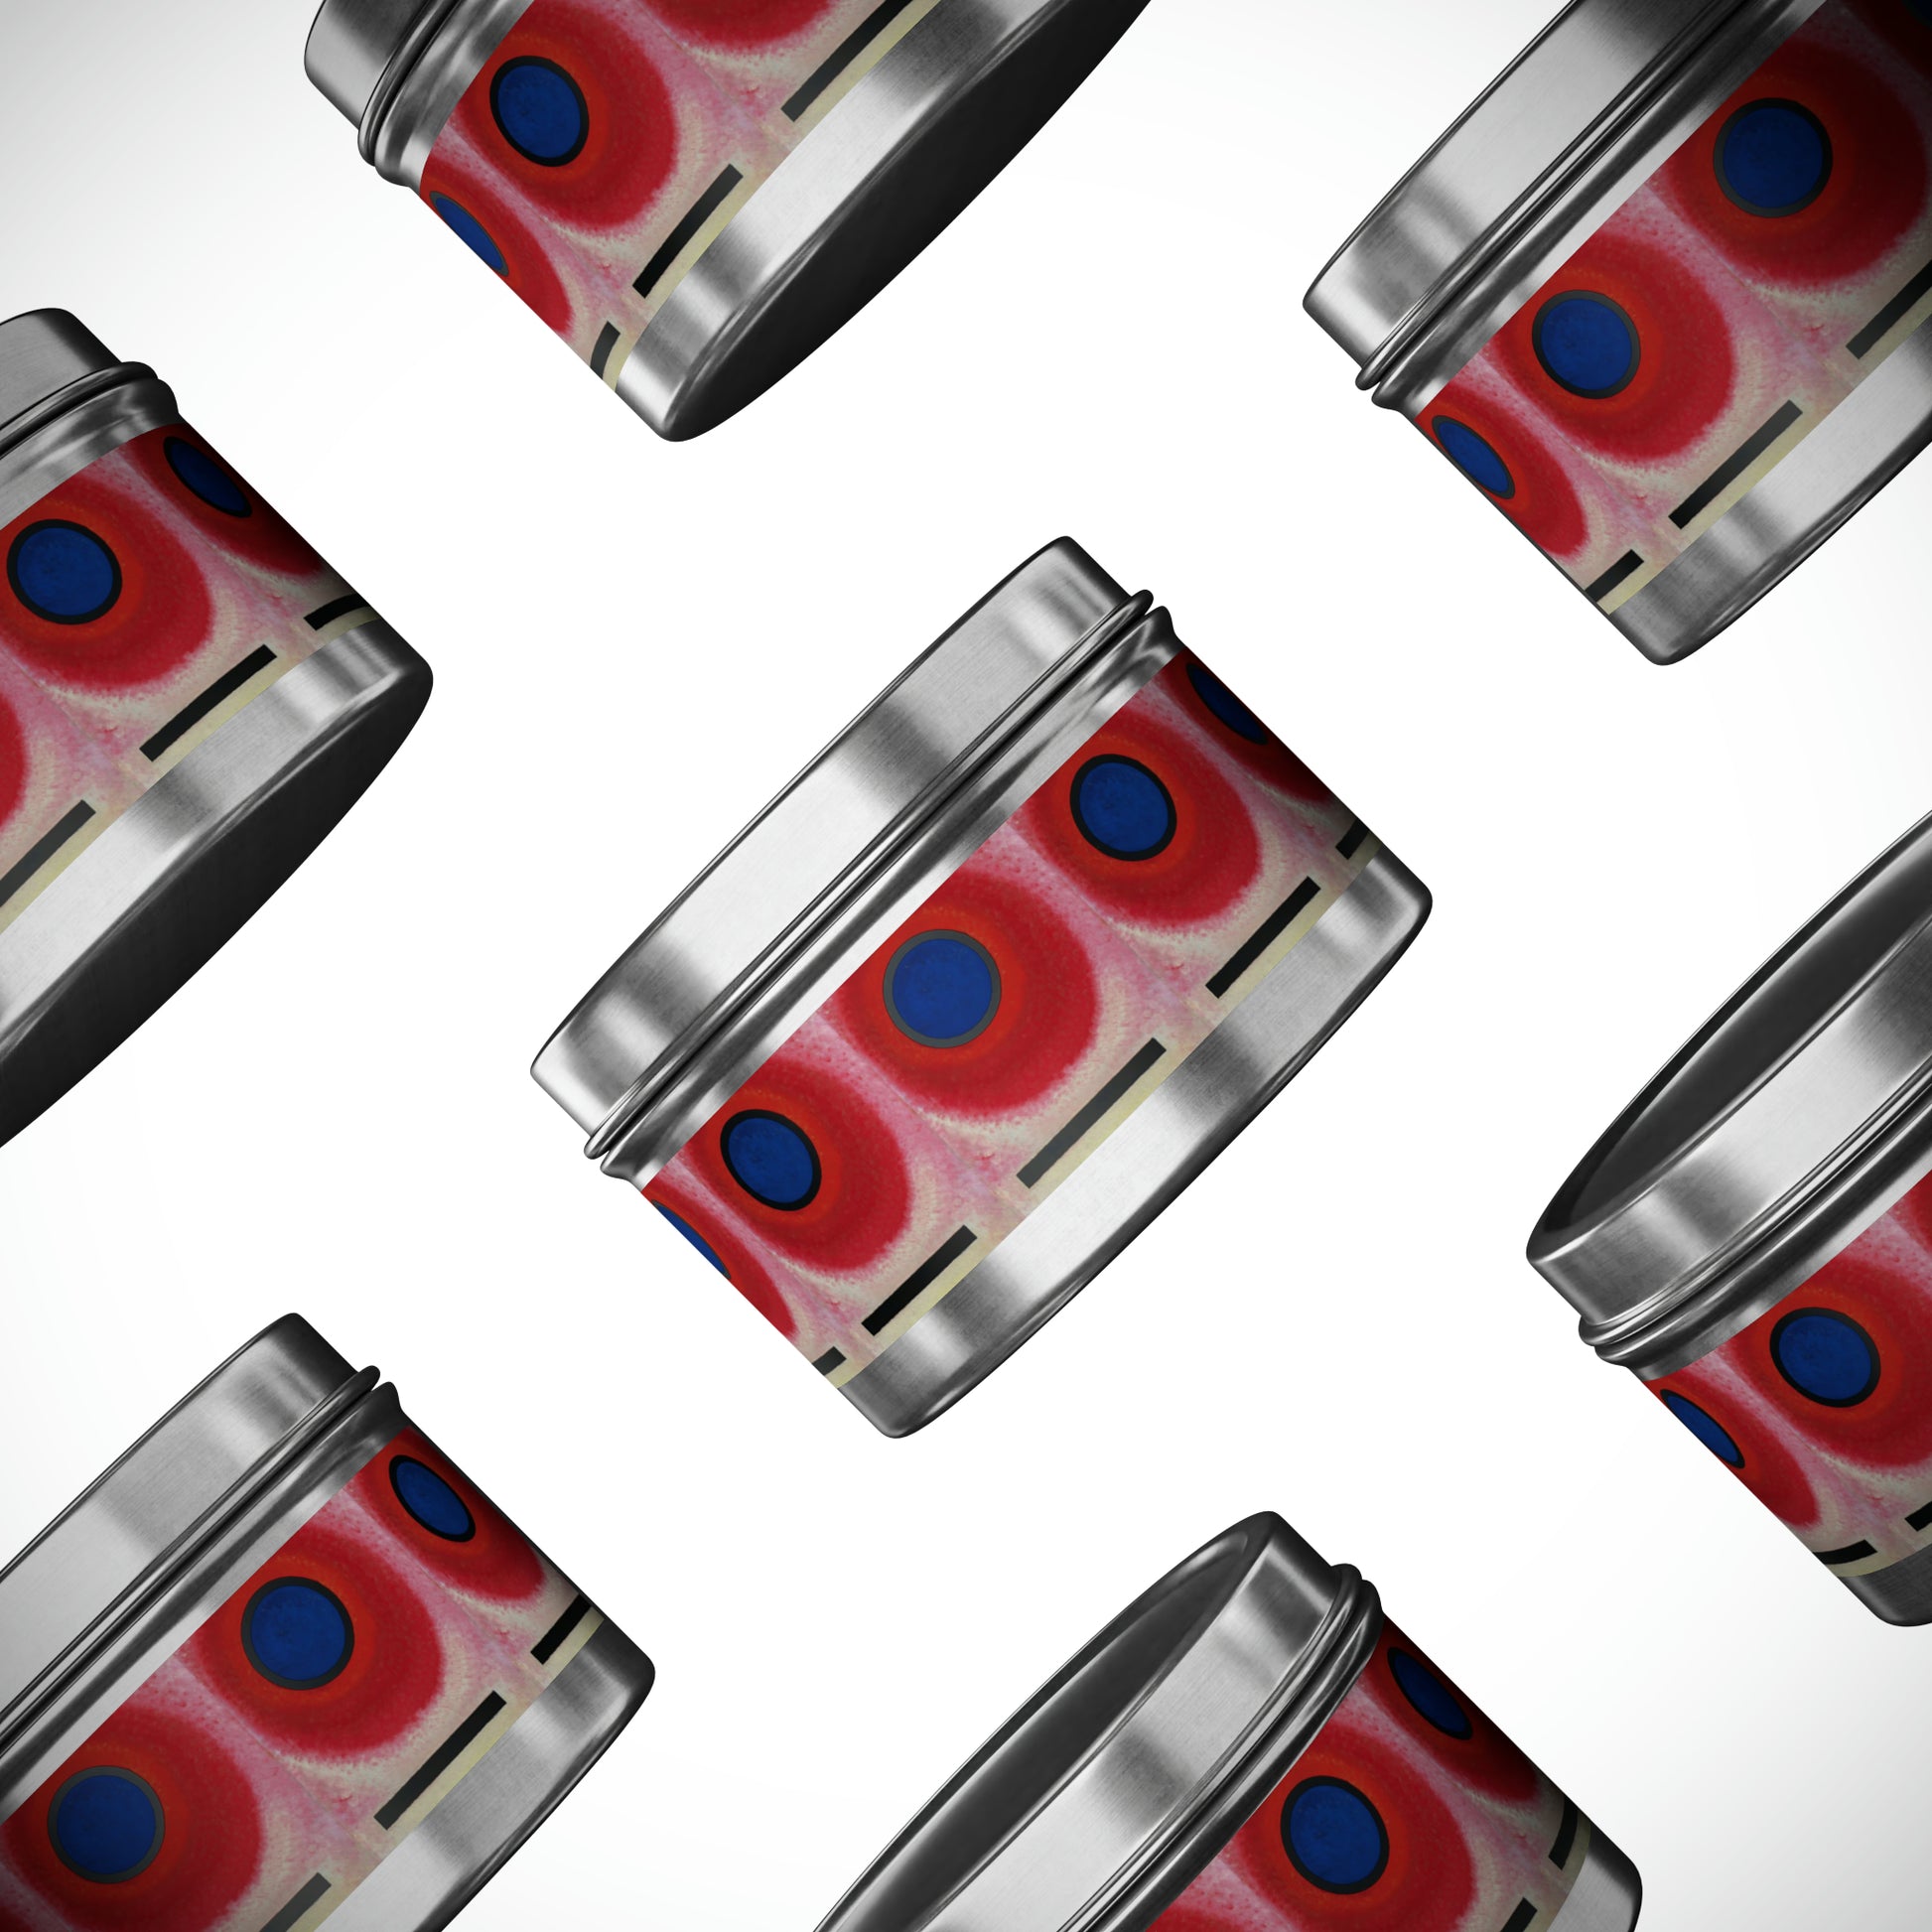 a group of cans with red and blue circles on them